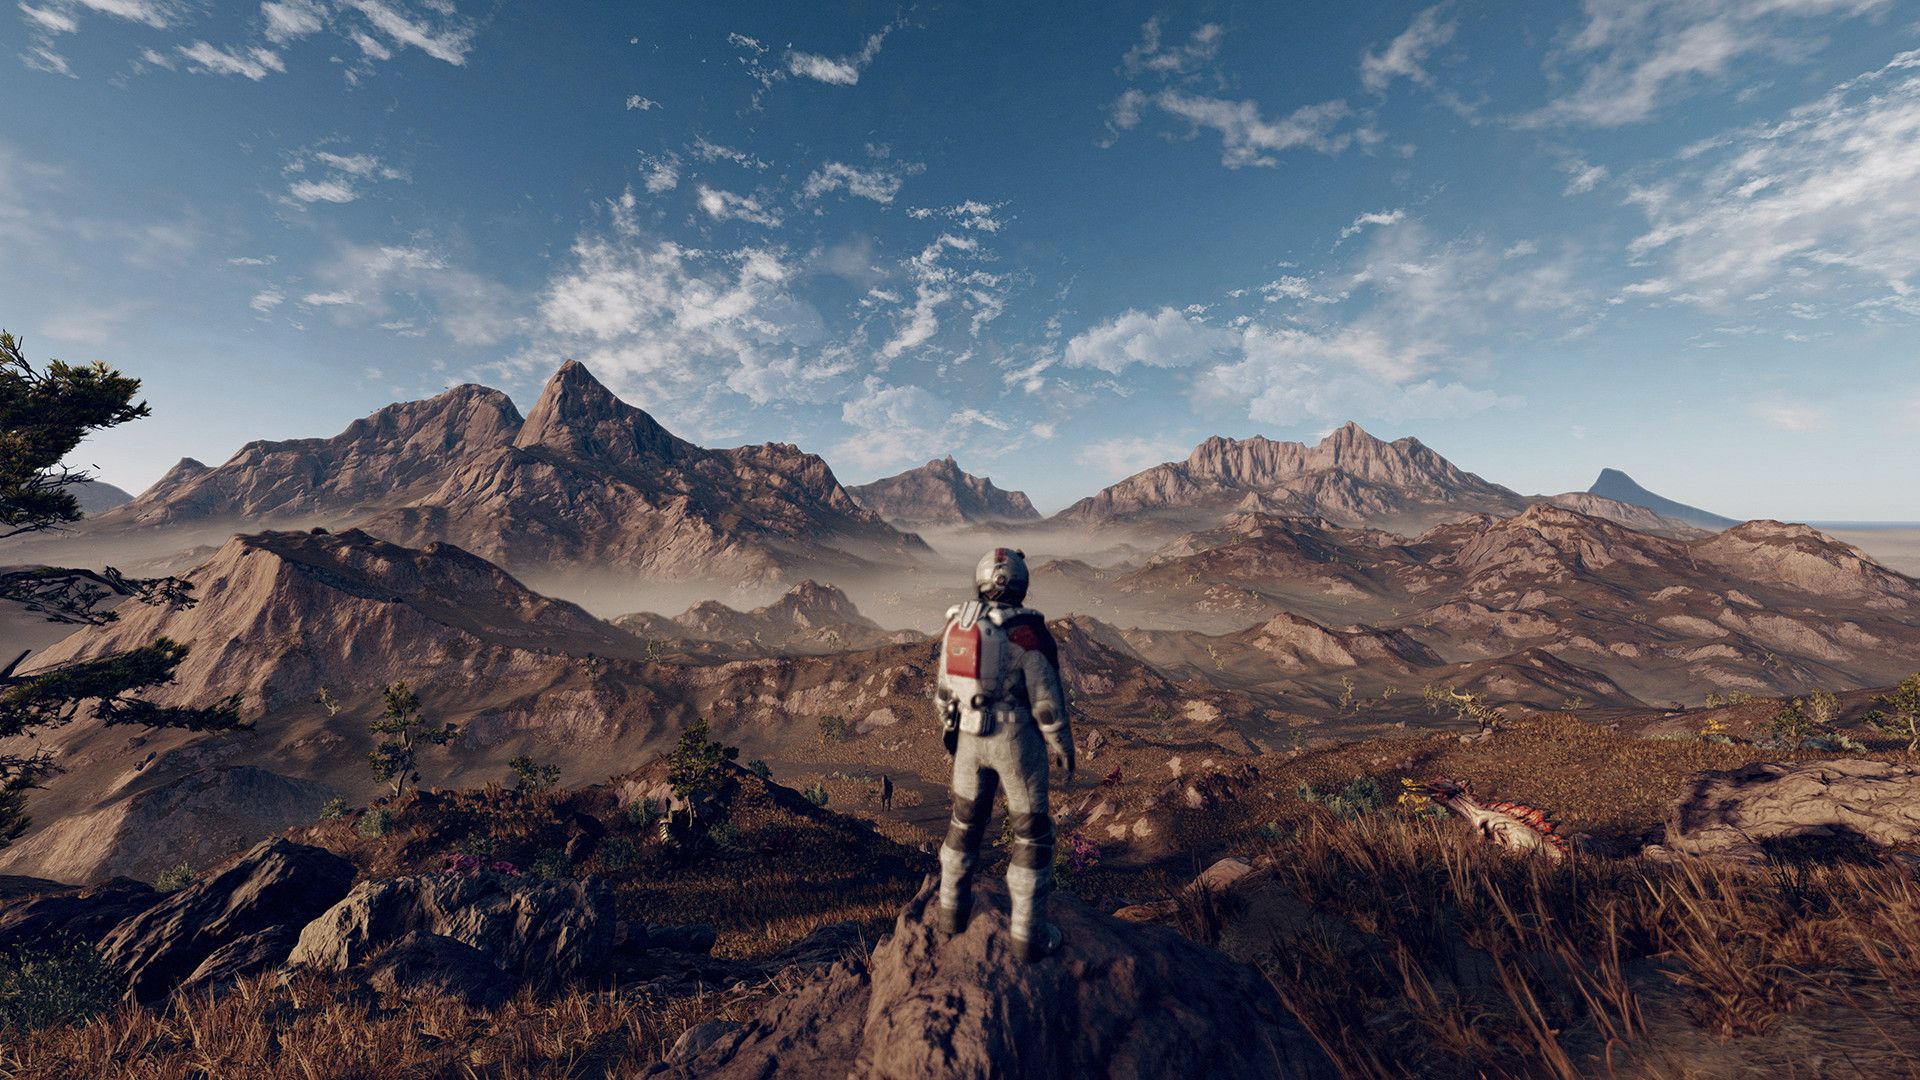 Video game screenshot of a person in a spacesuit looking out at a mountain vista